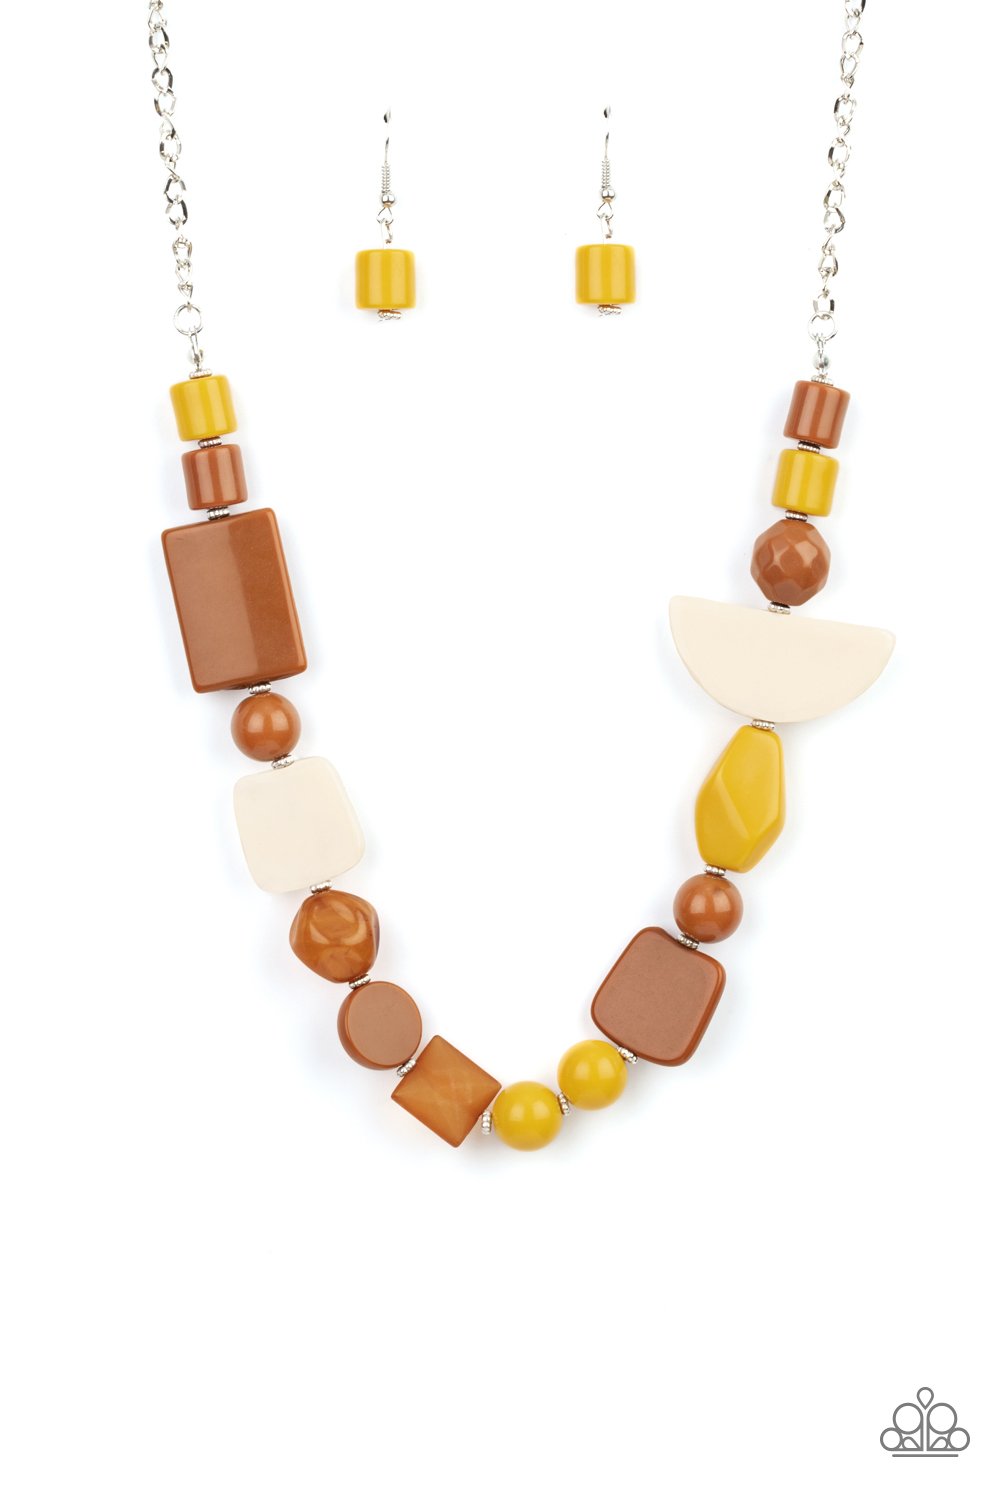 Tranquil Trendsetter Yellow Necklace - Daria's Blings N Things